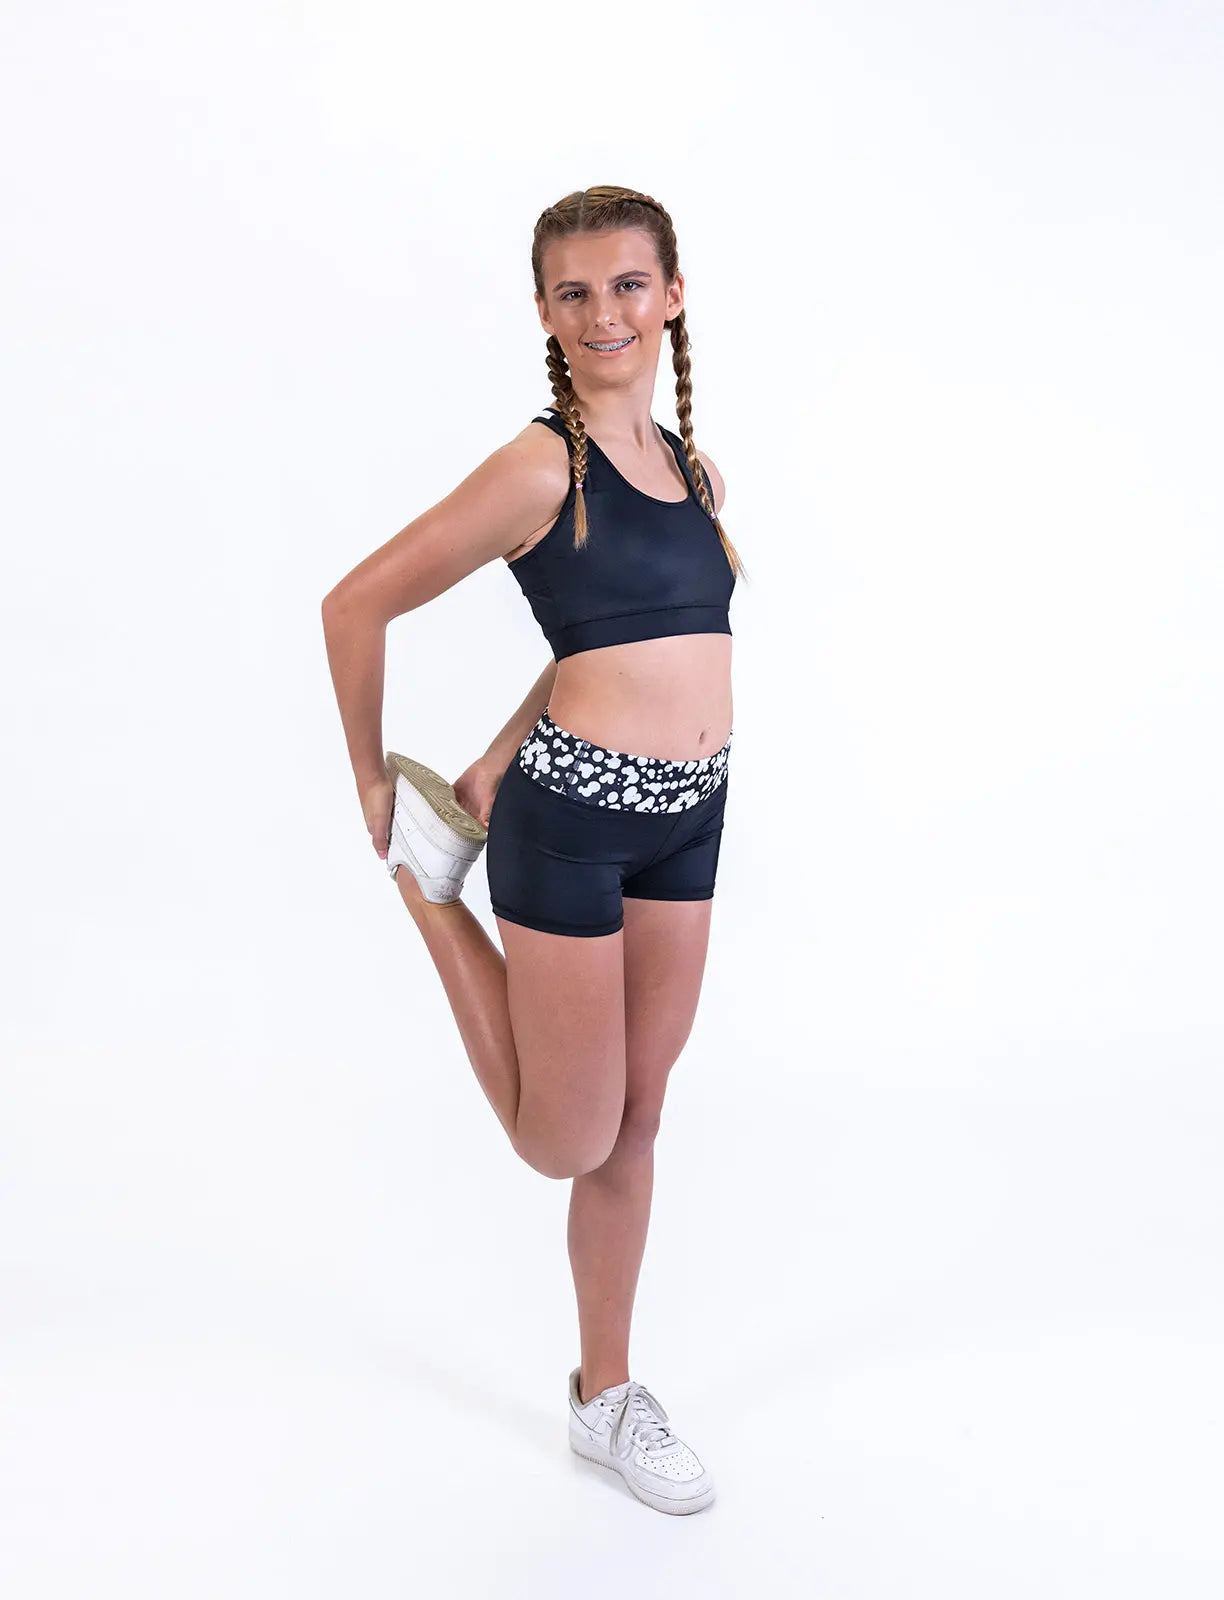 AS Adult Small Cheer Extreme CEA Raleigh Bling Sports Bra Black